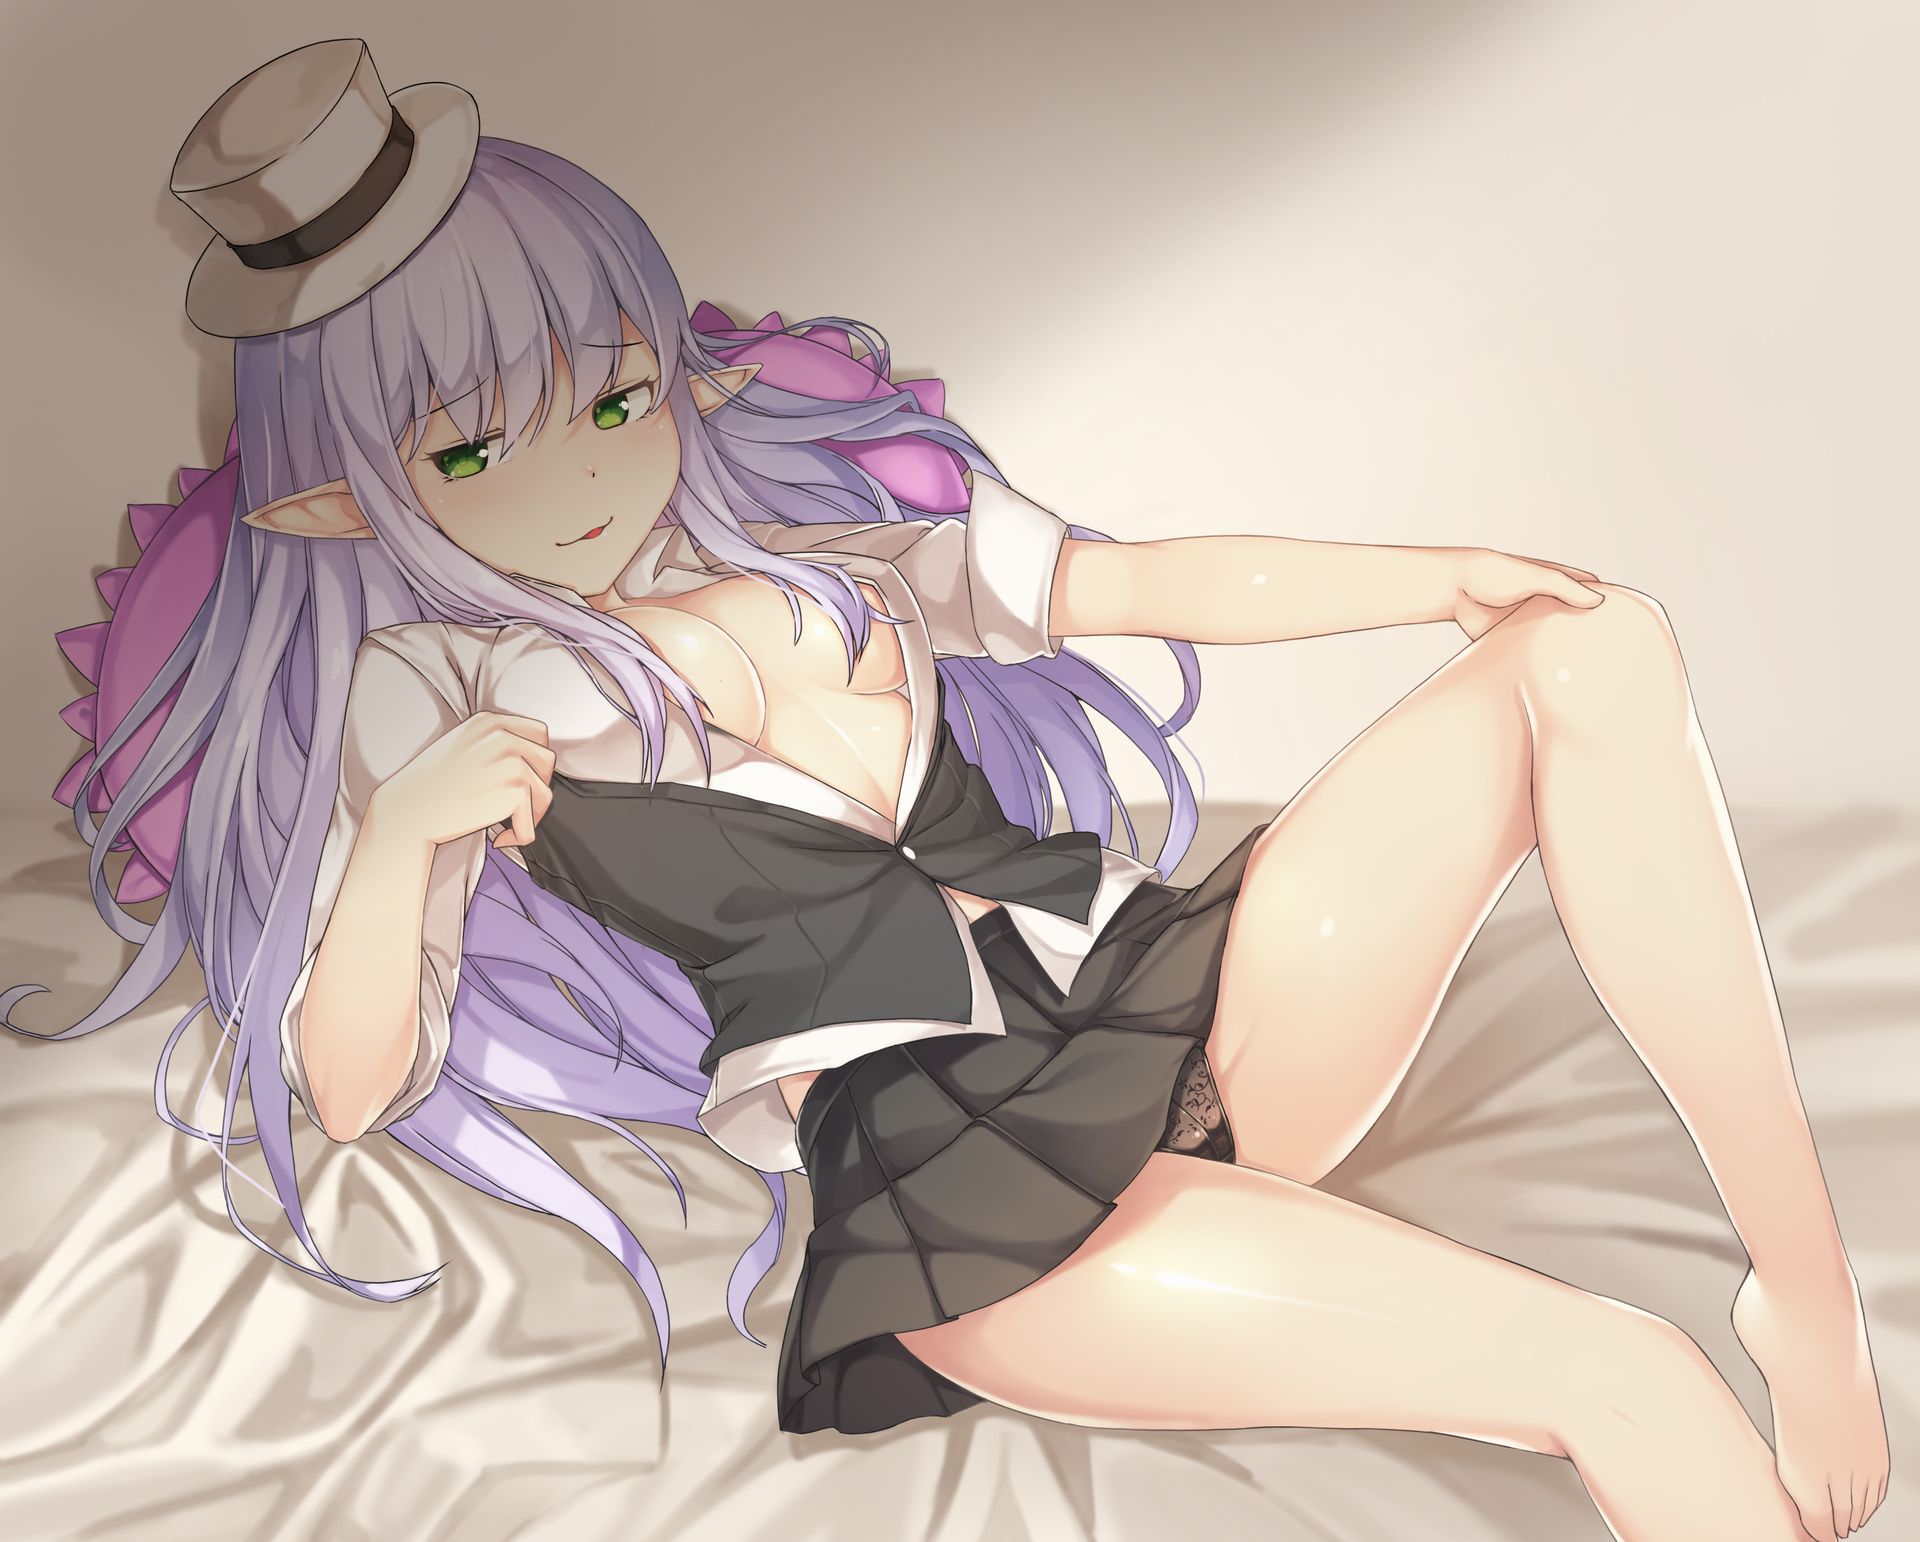 [Secondary/ZIP] Second image of a happy underwear daughter that is just a cloth 45